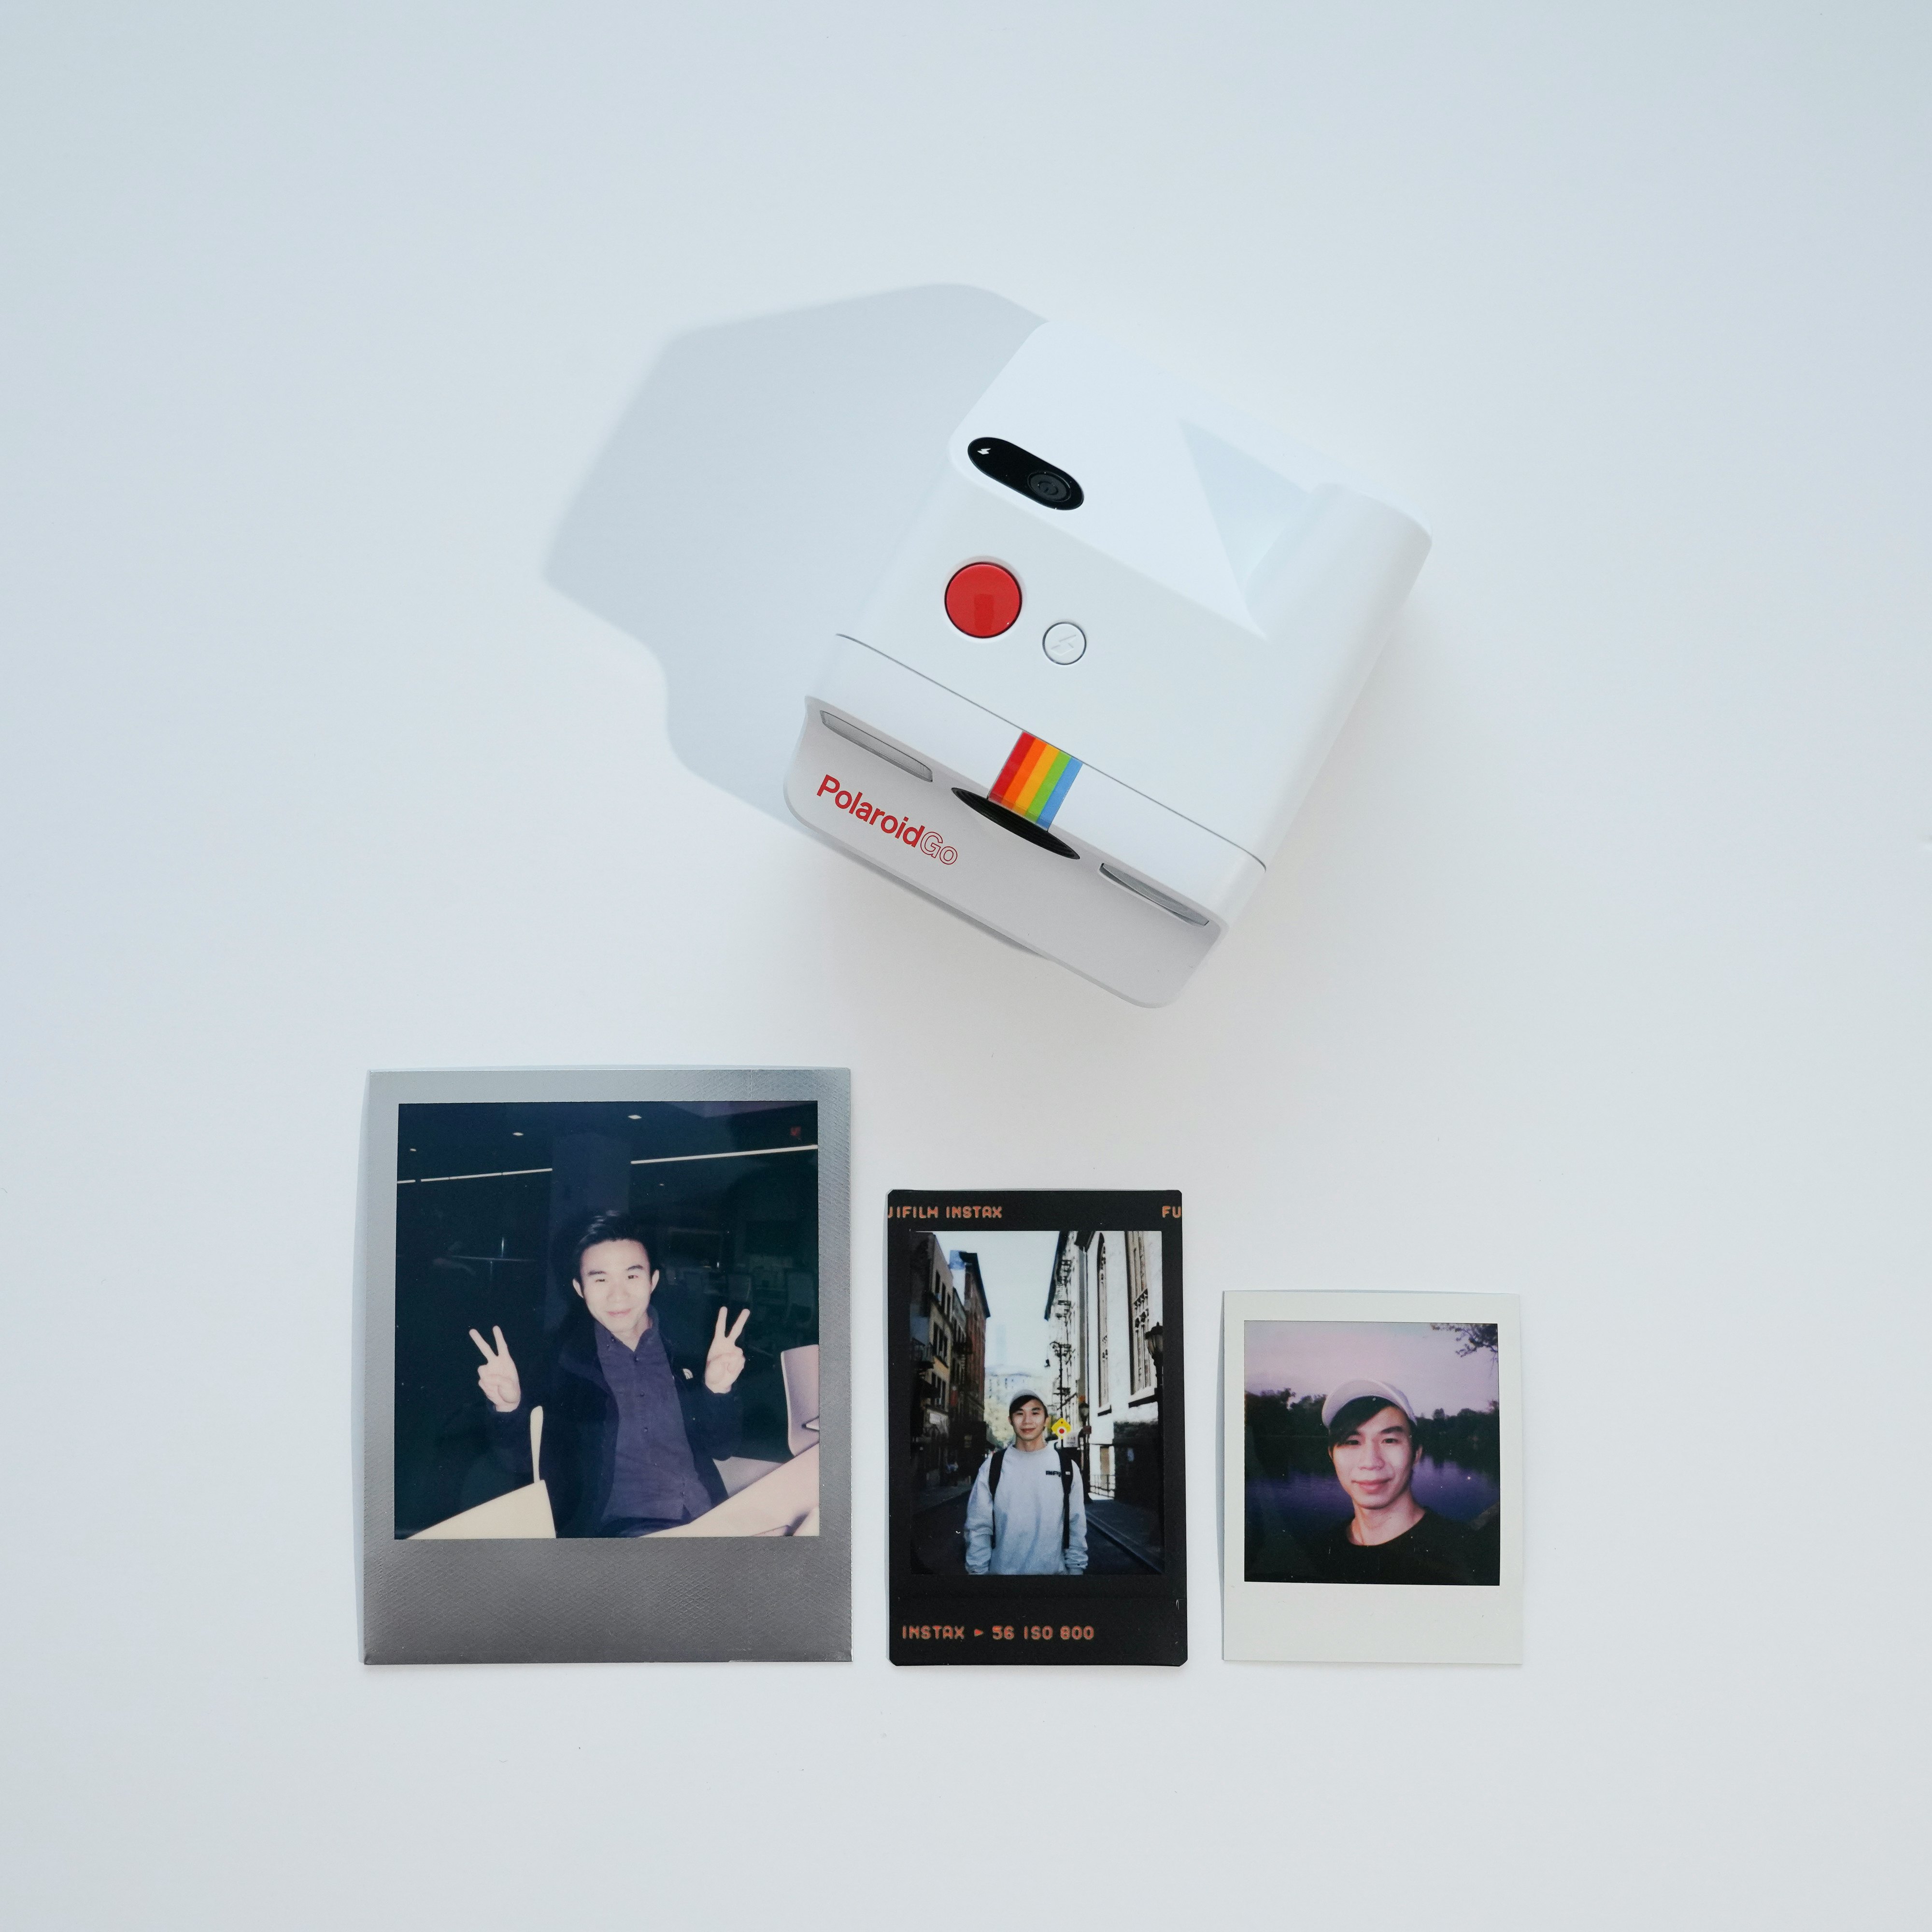 Polaroid Go review: An intentional rejection of Instagram's fake